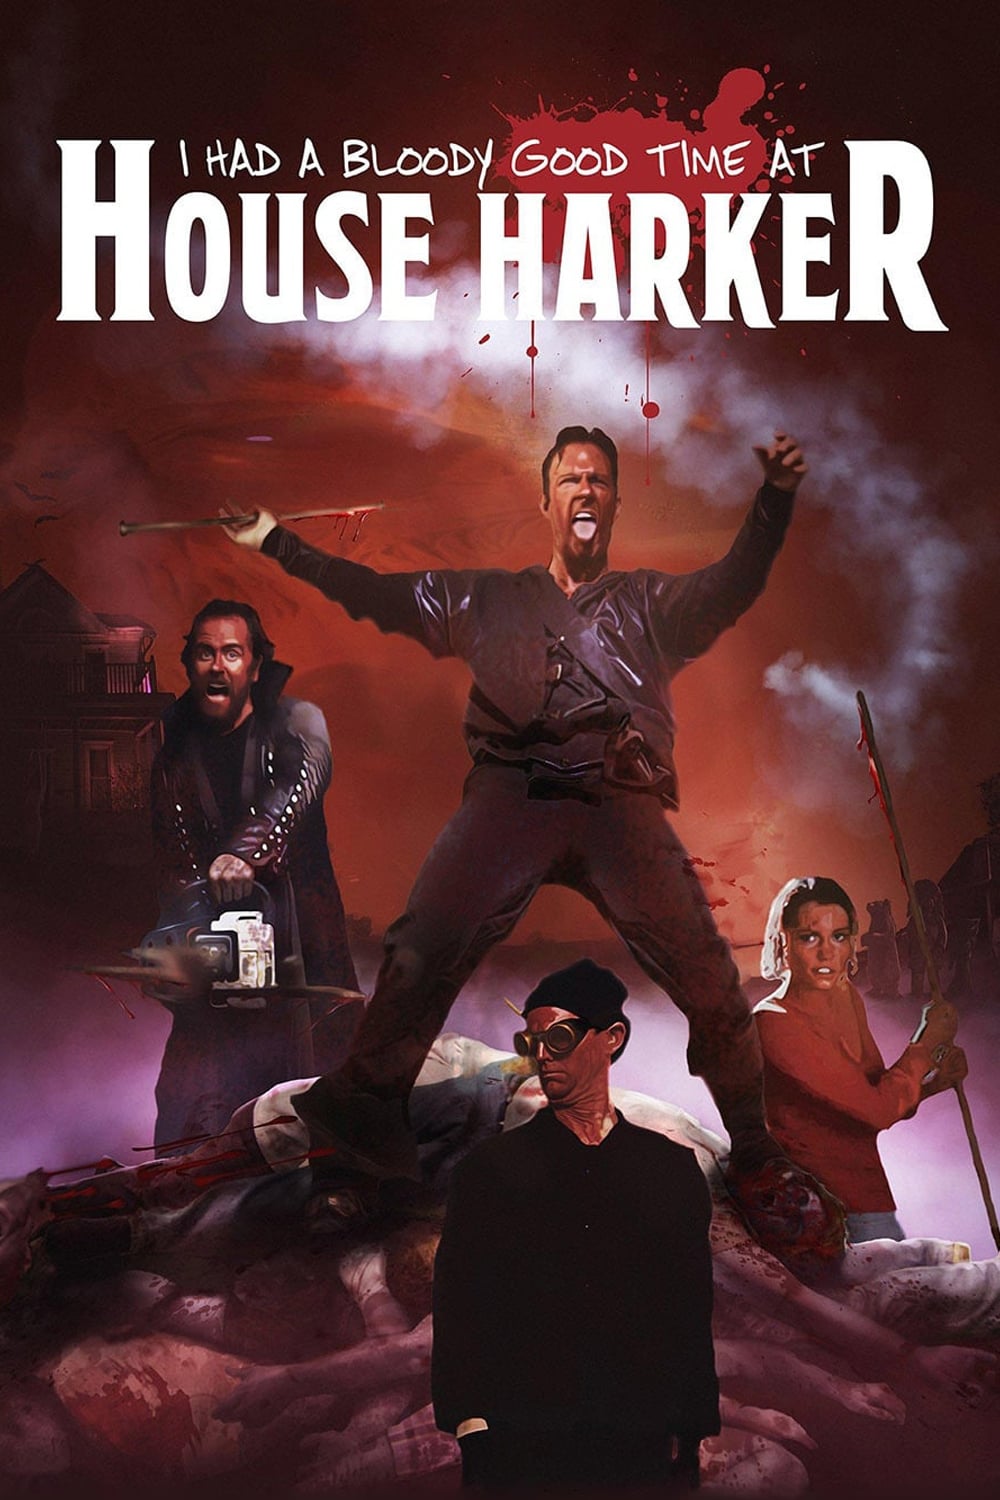 I Had A Bloody Good Time At House Harker film